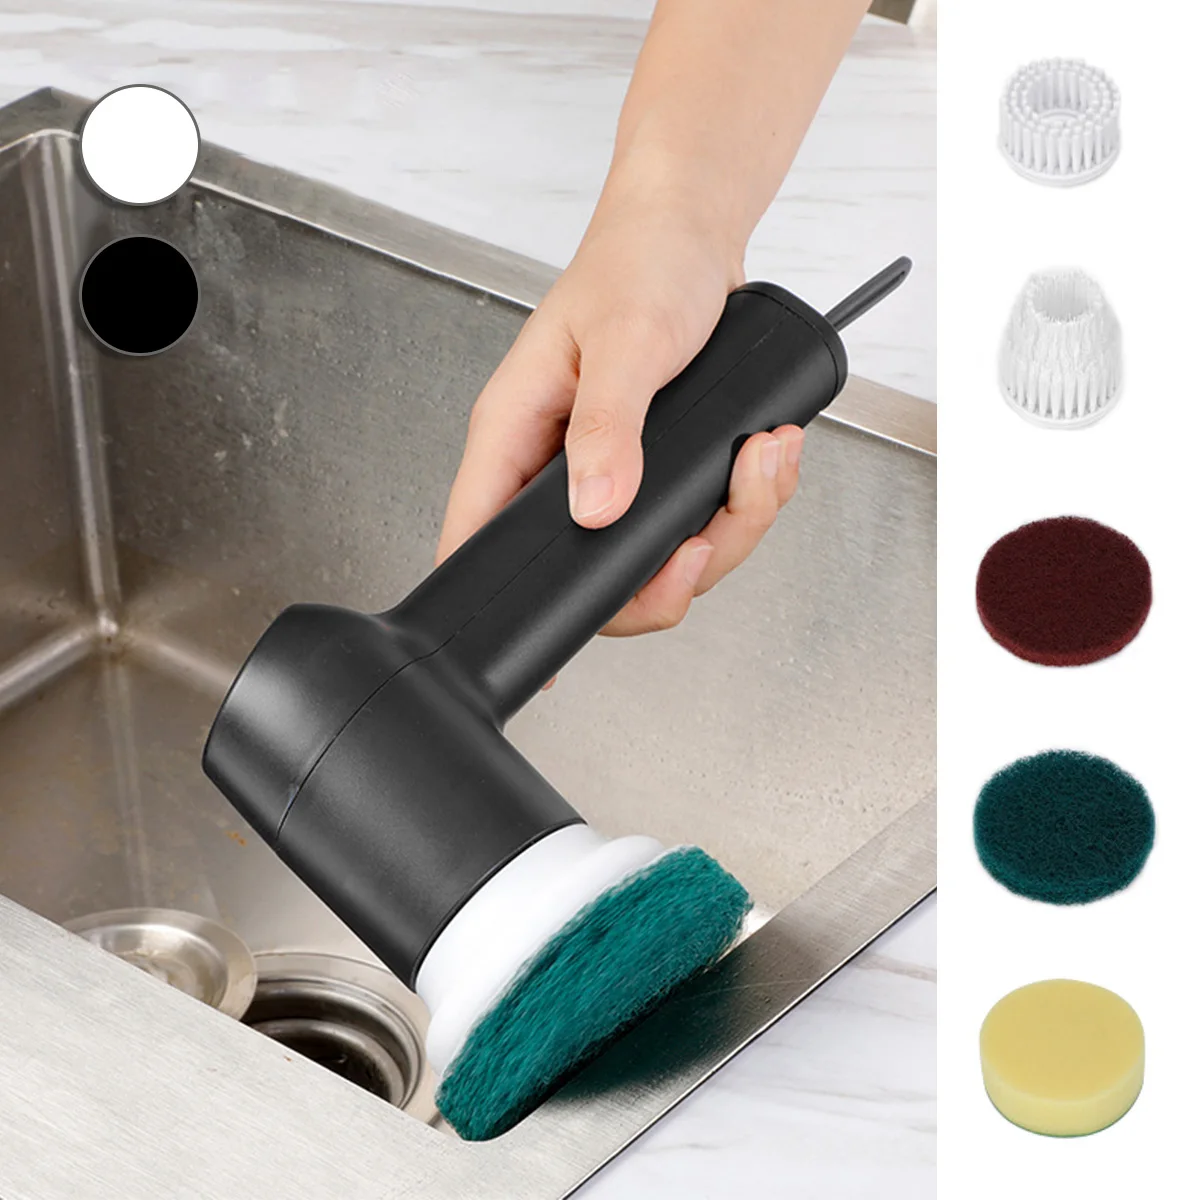 Electric Spin Scrubber Rechargeable Cordless Electric Cleaning Brush Waterproof Power Scrub Brush with 1500mAh Battery and 5